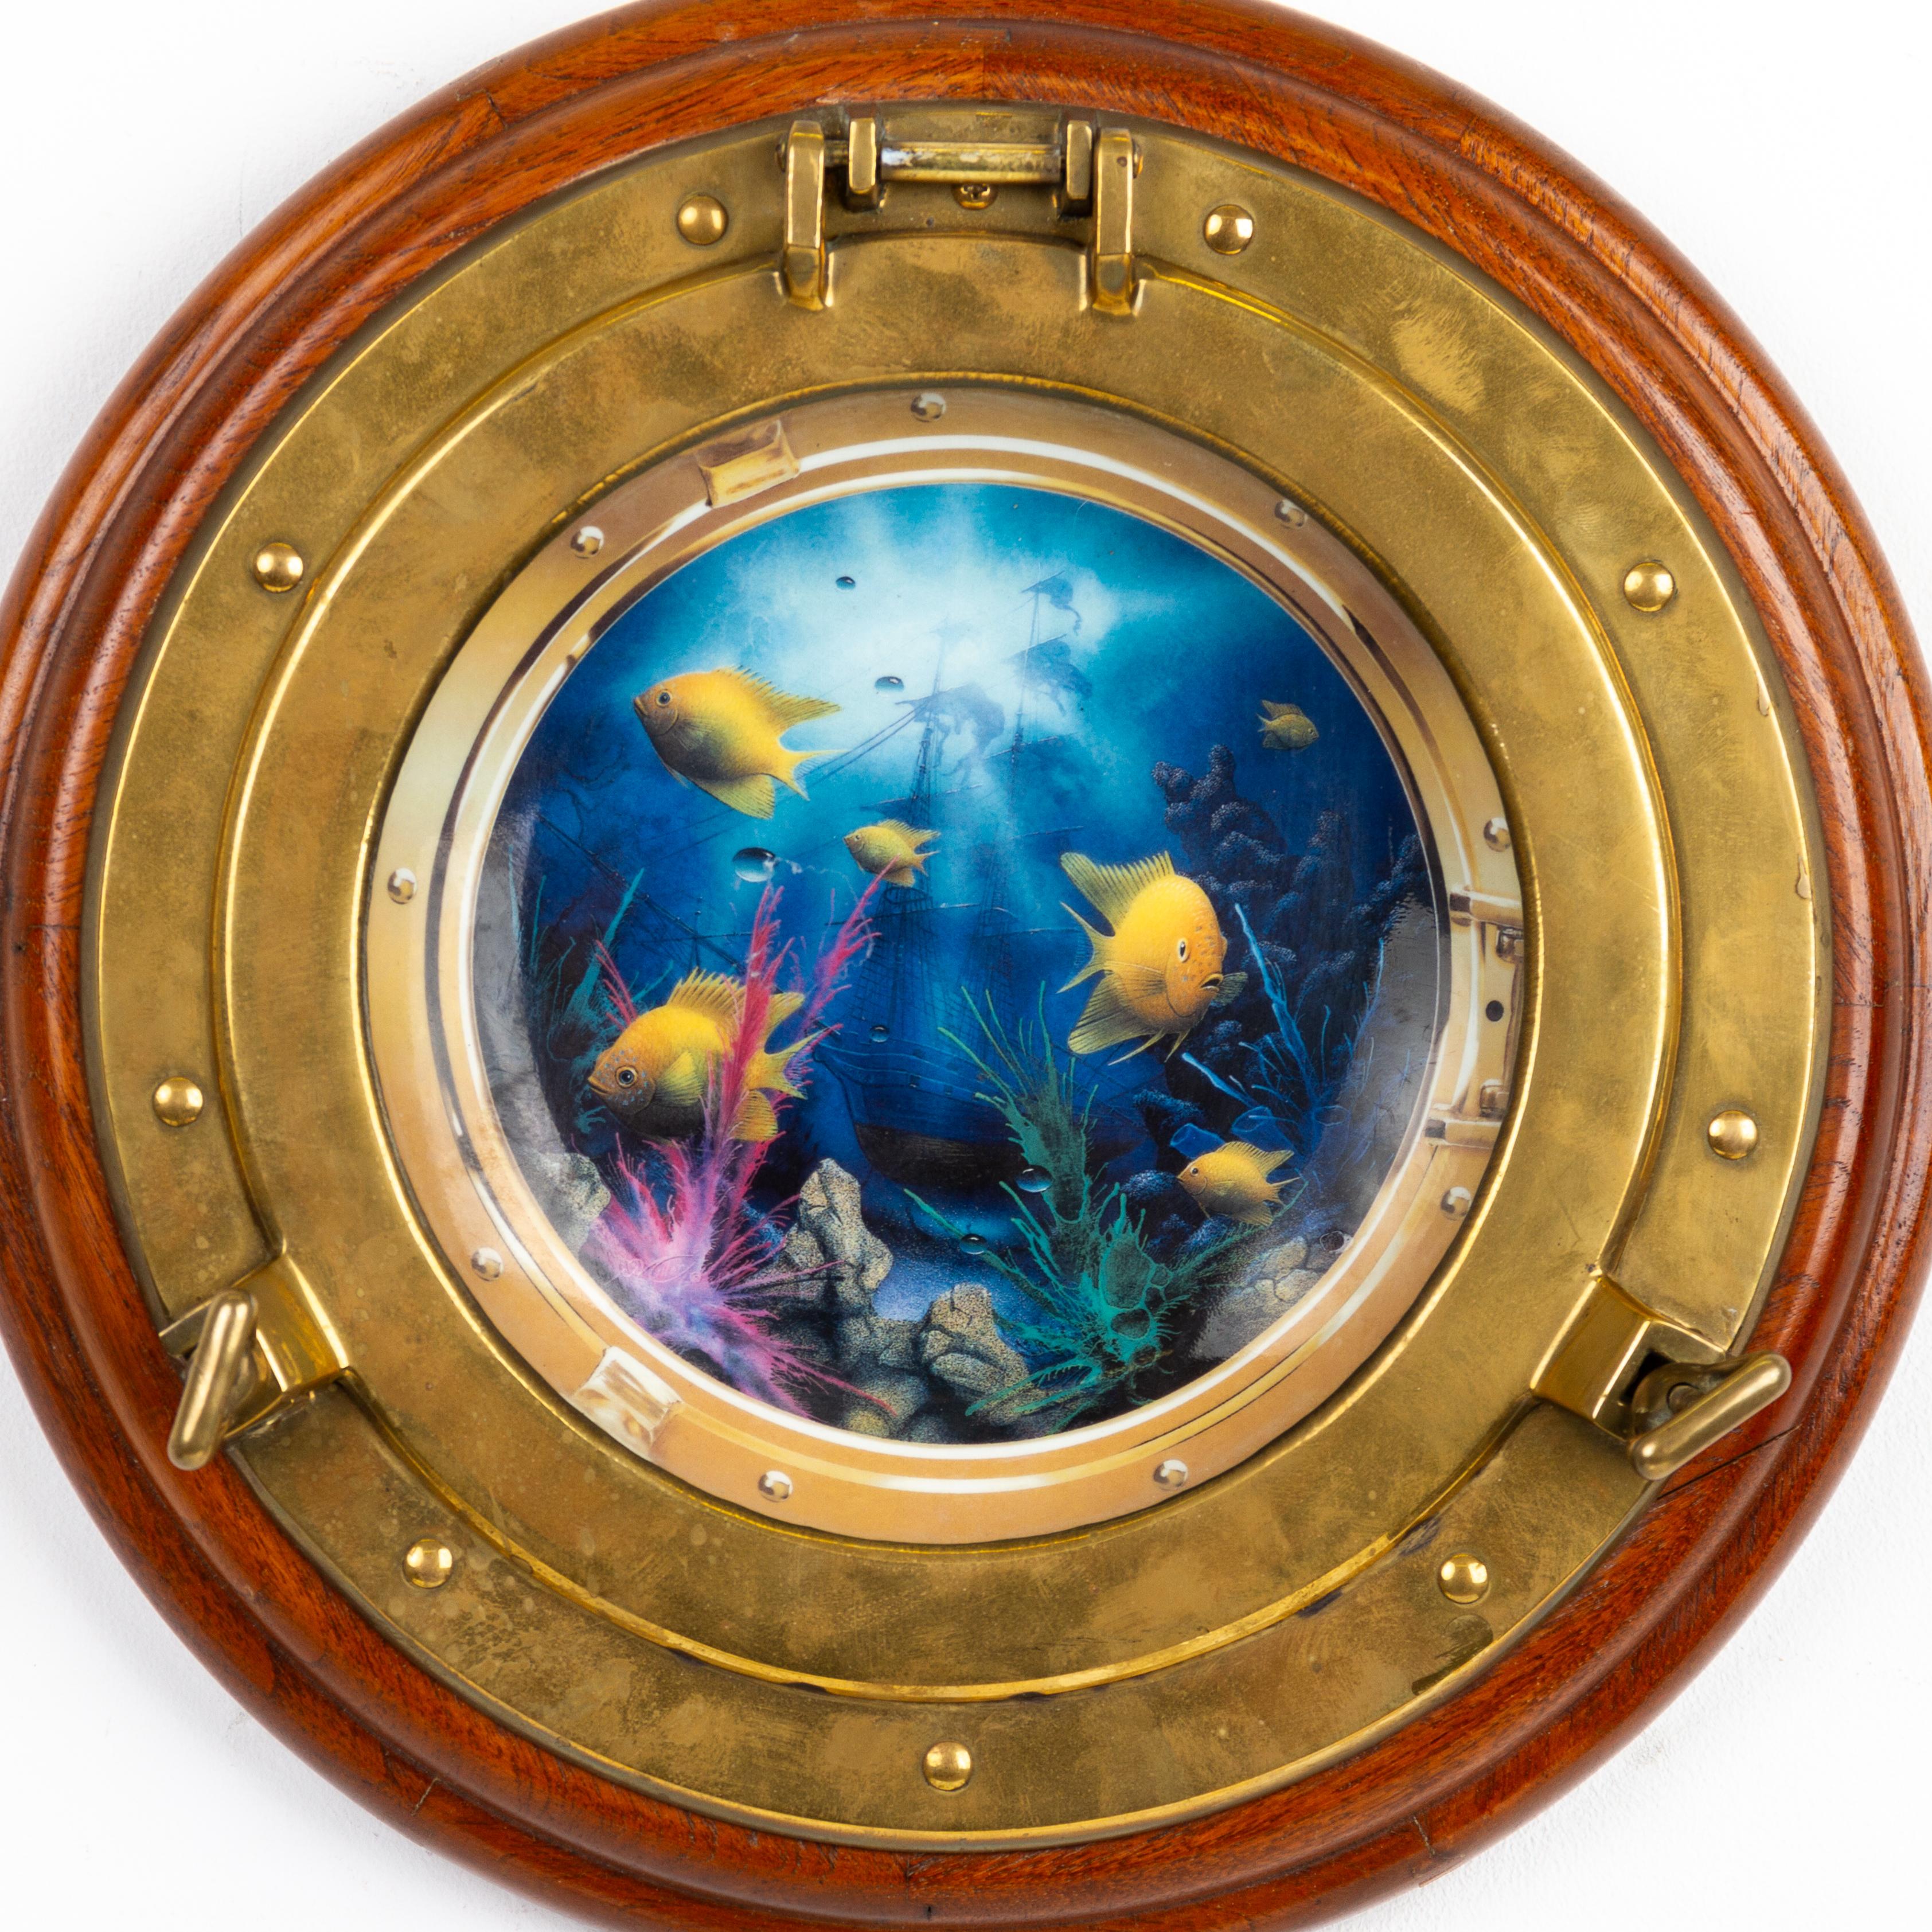 Neptune's Porthole Brass & Porcelain Wall Hanging 
Good condition overall

Free international shipping.